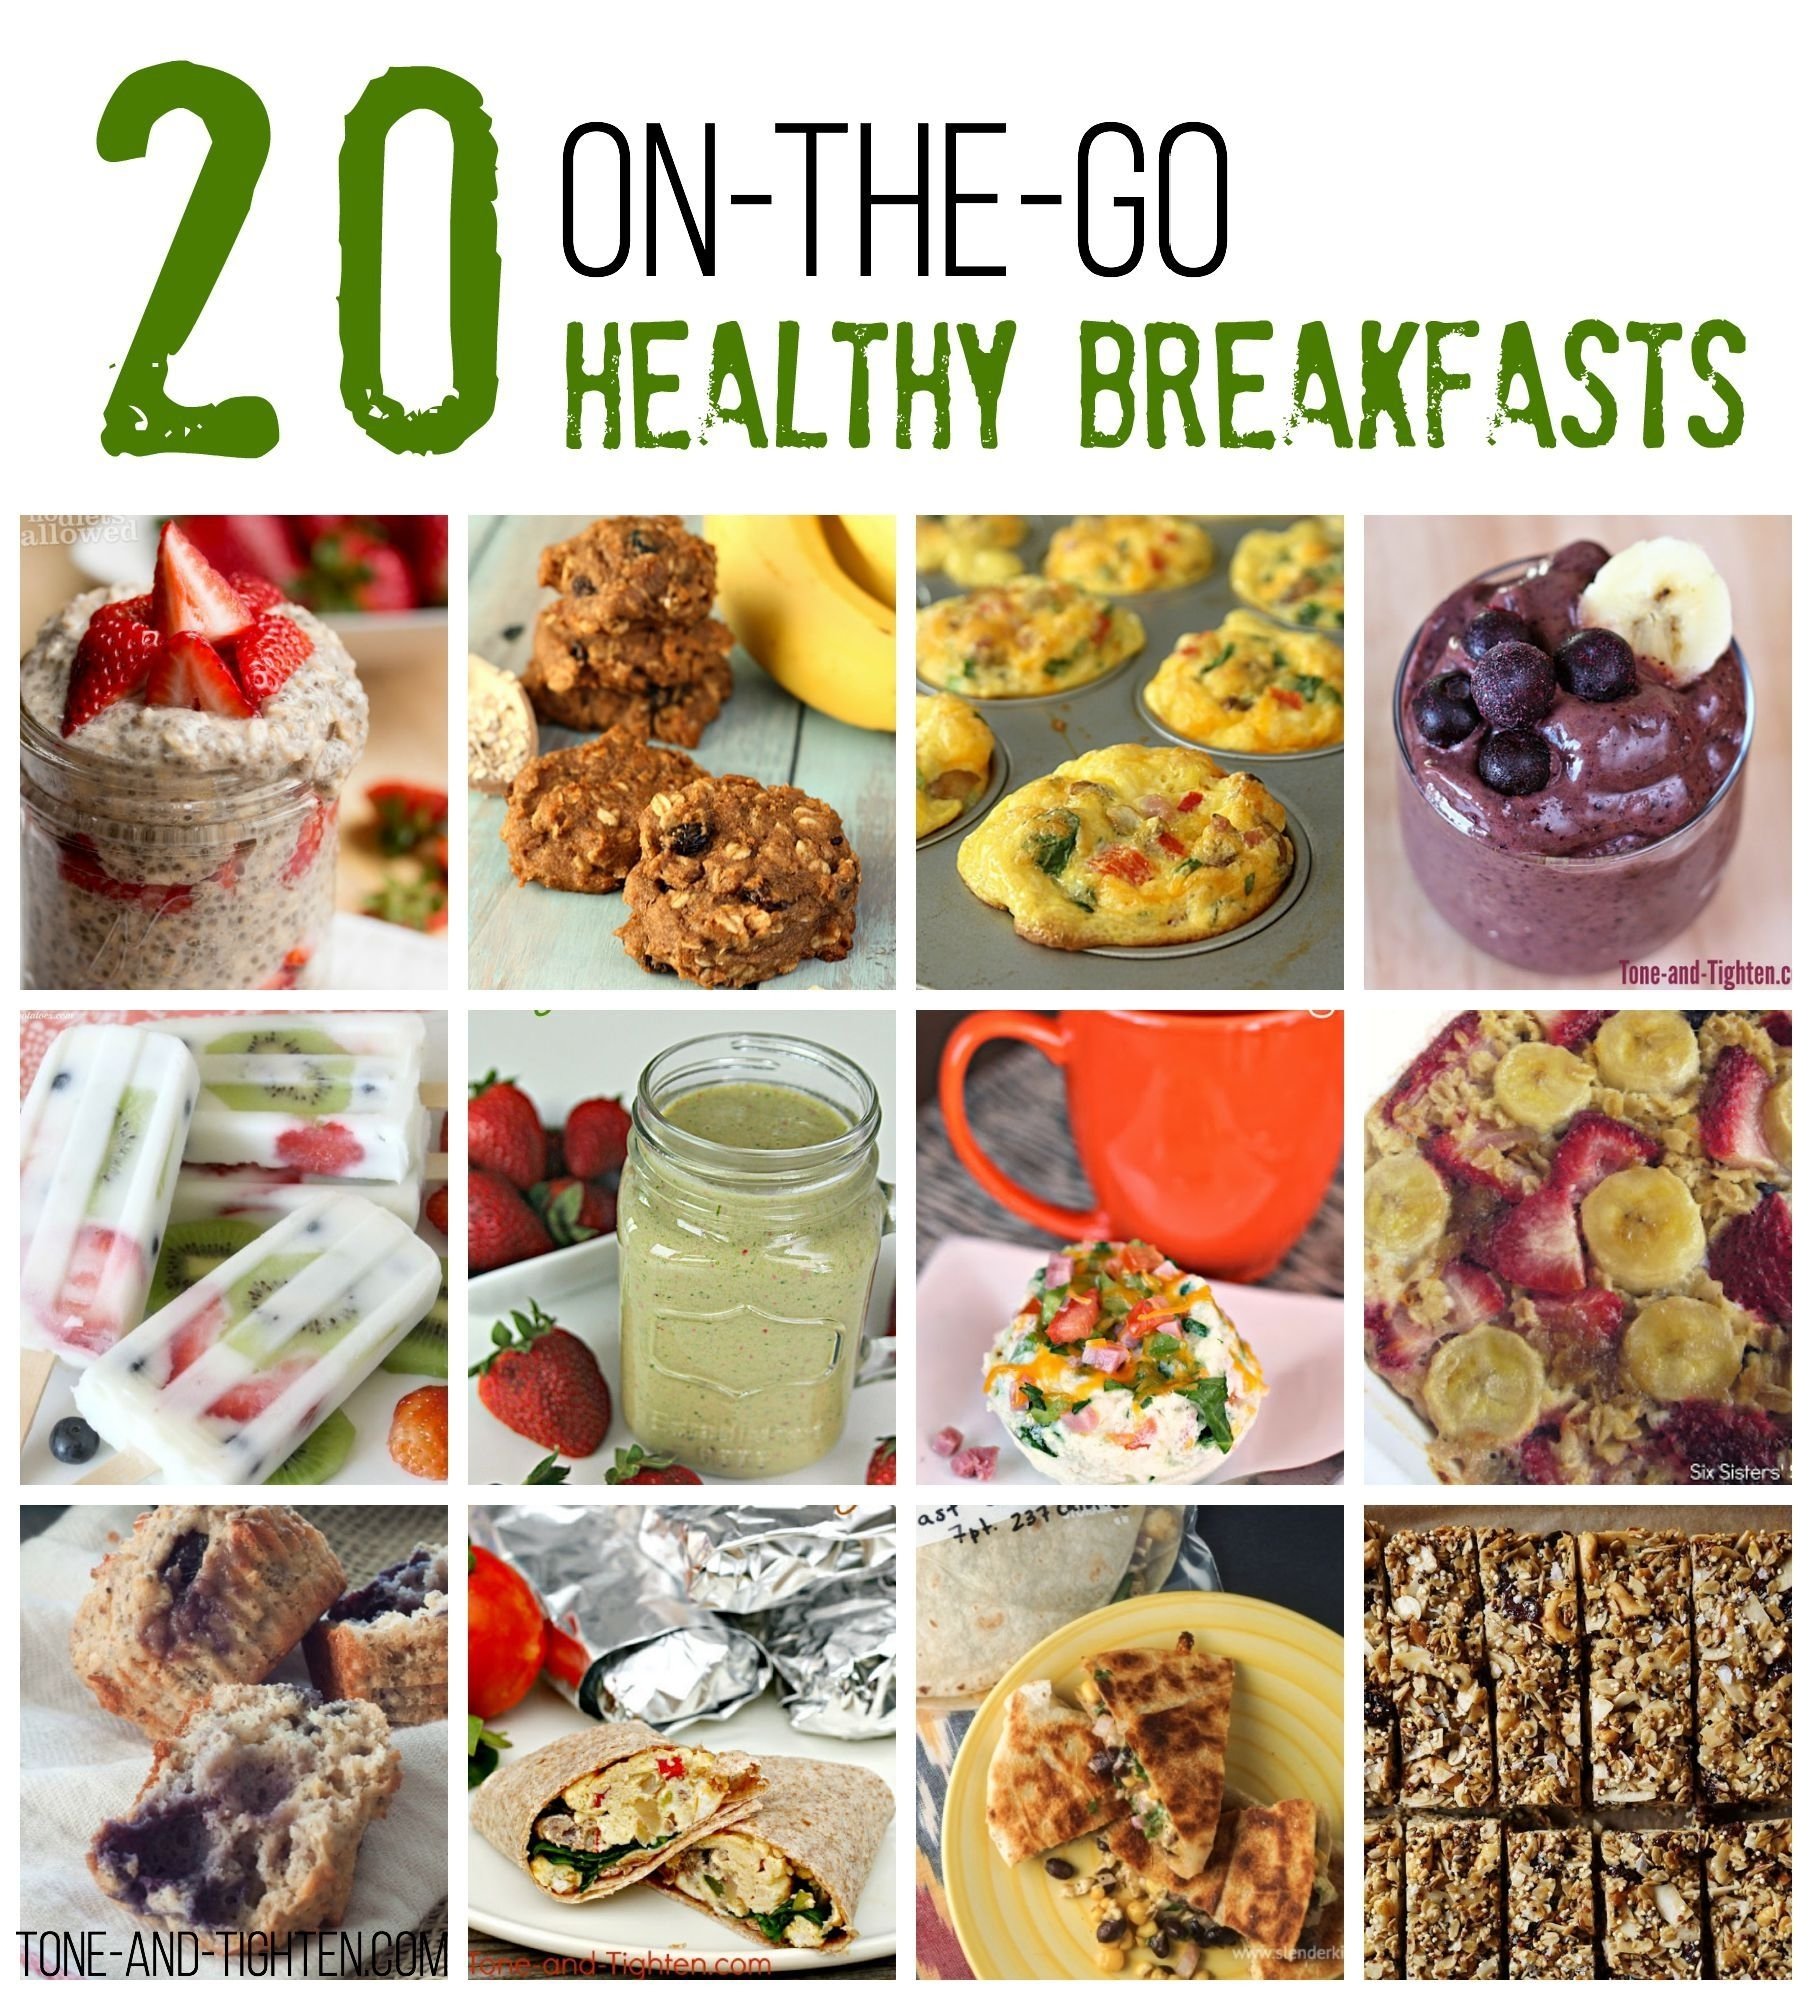 10 Awesome Quick Healthy Breakfast Ideas On The Go 20 on the go healthy breakfast recipes tone and tighten food 2022